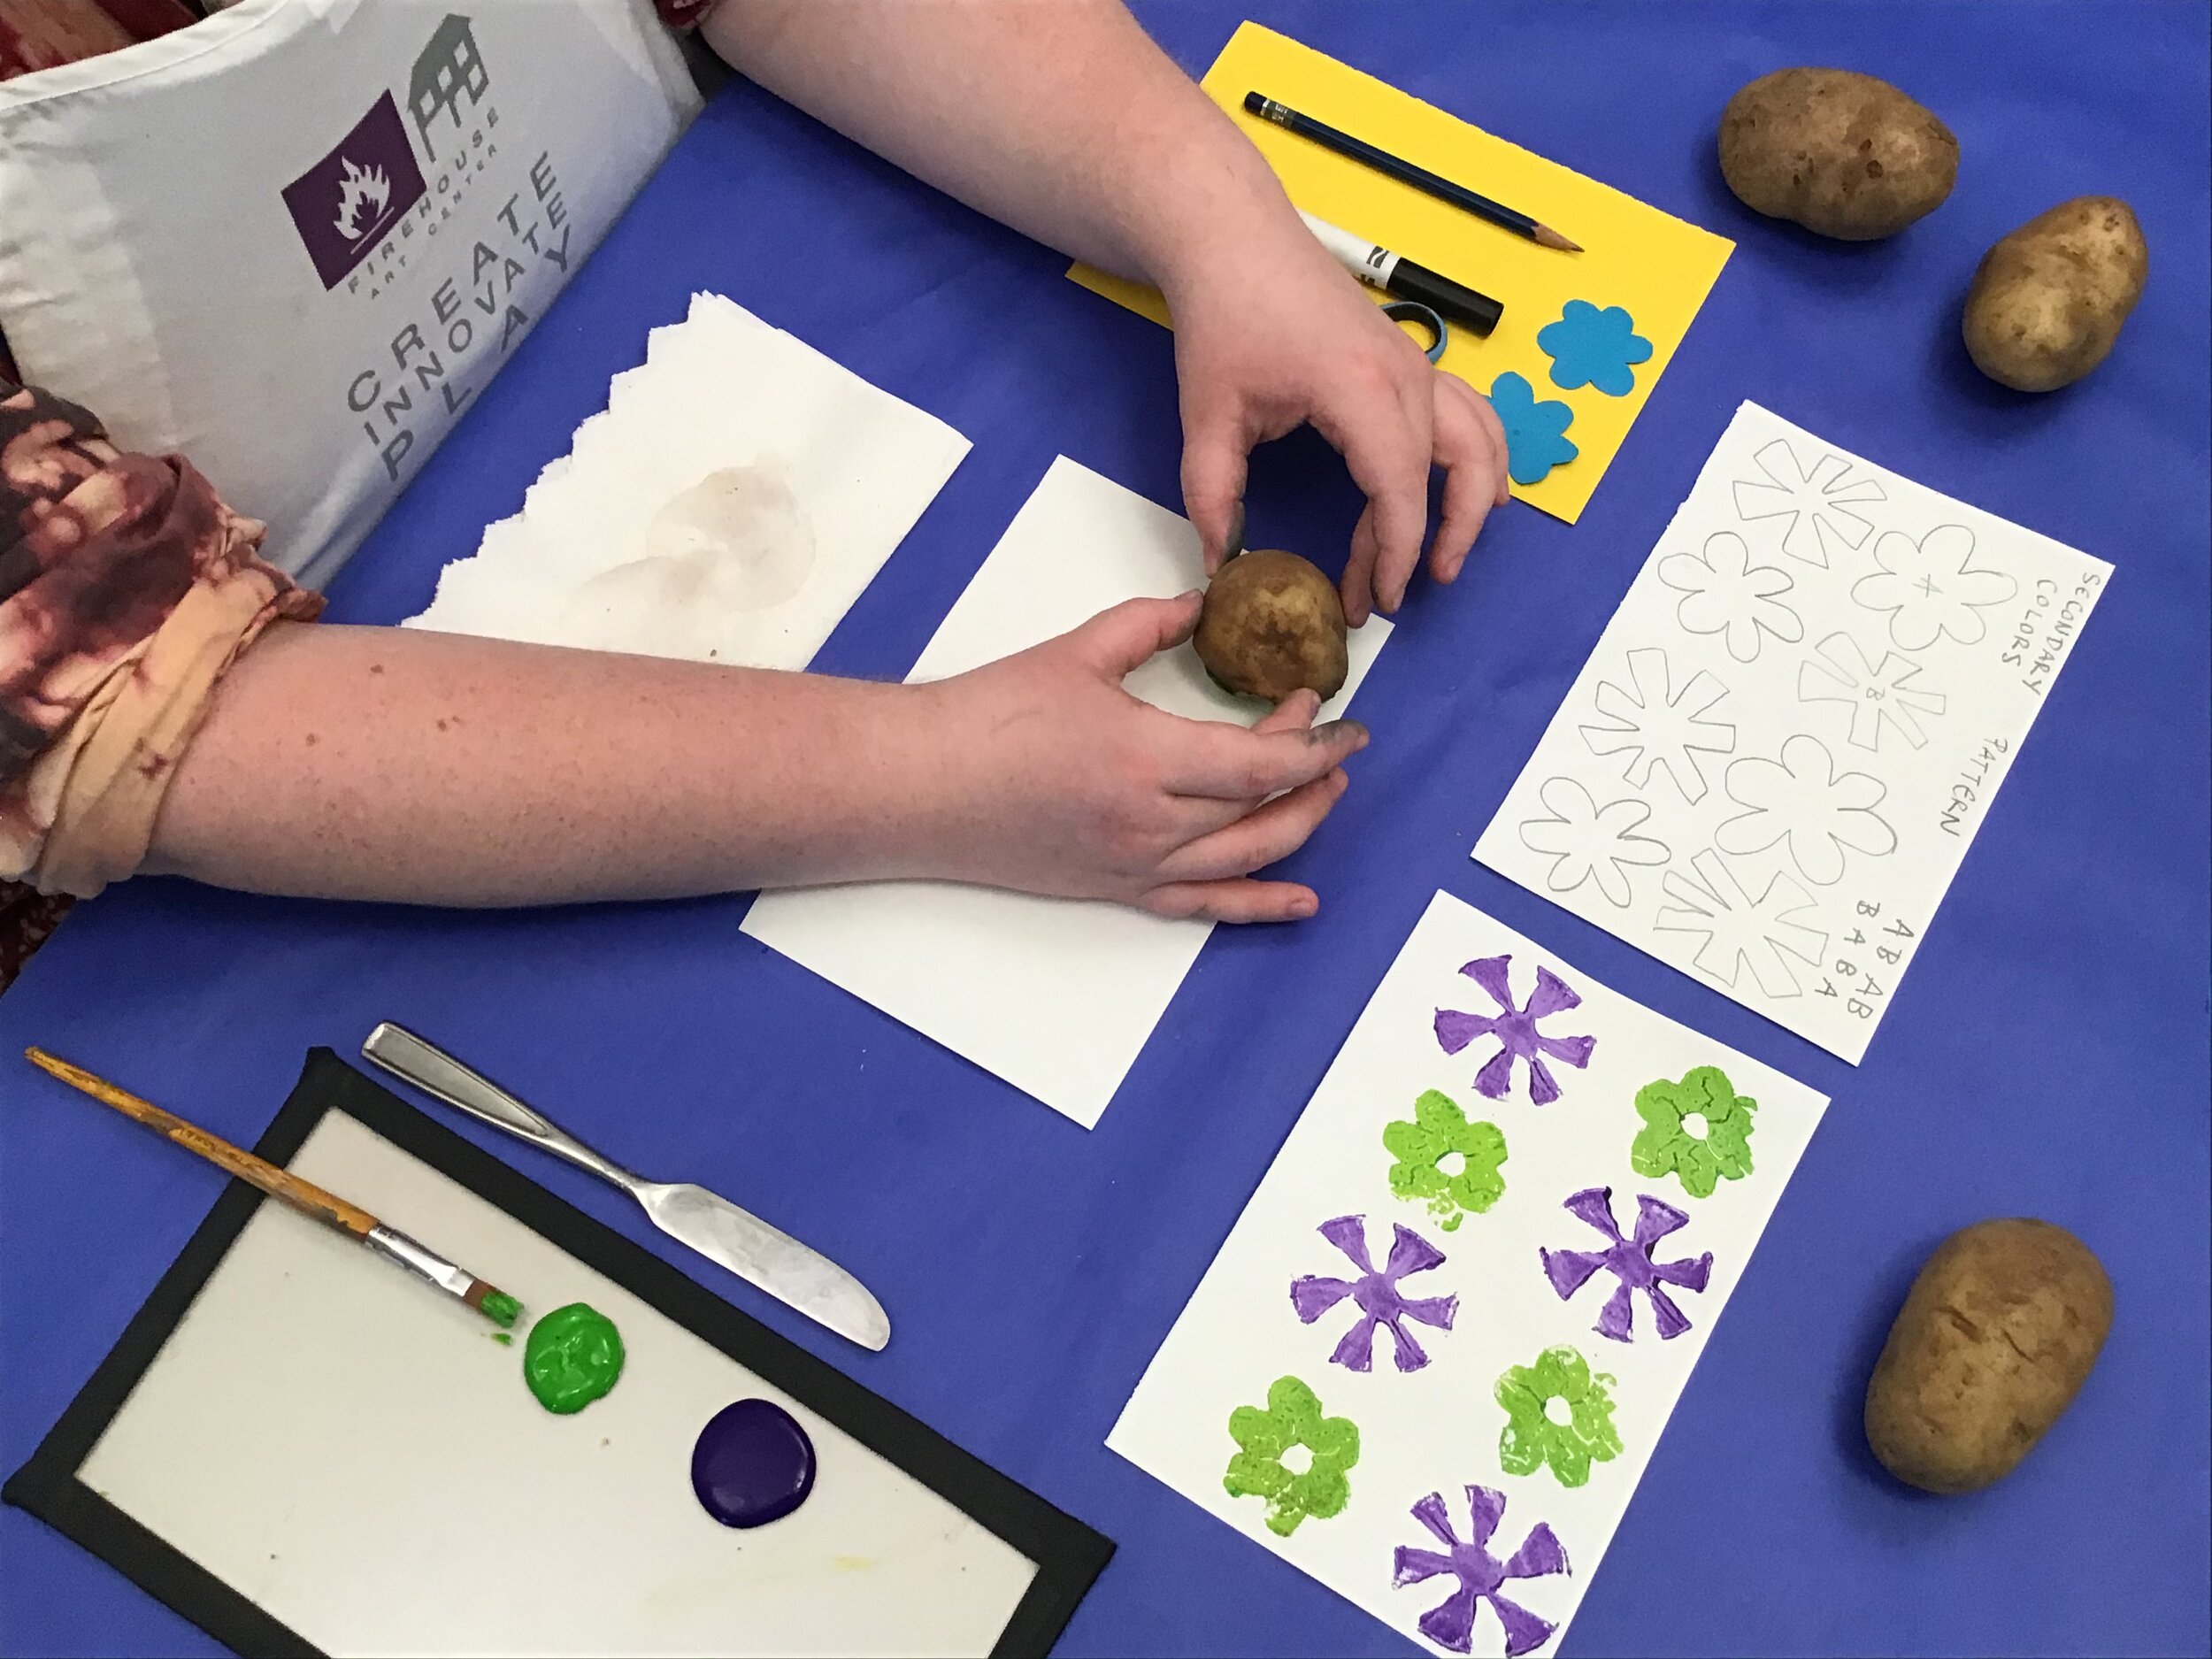 DIY Block Printing with a Potato - The House That Lars Built